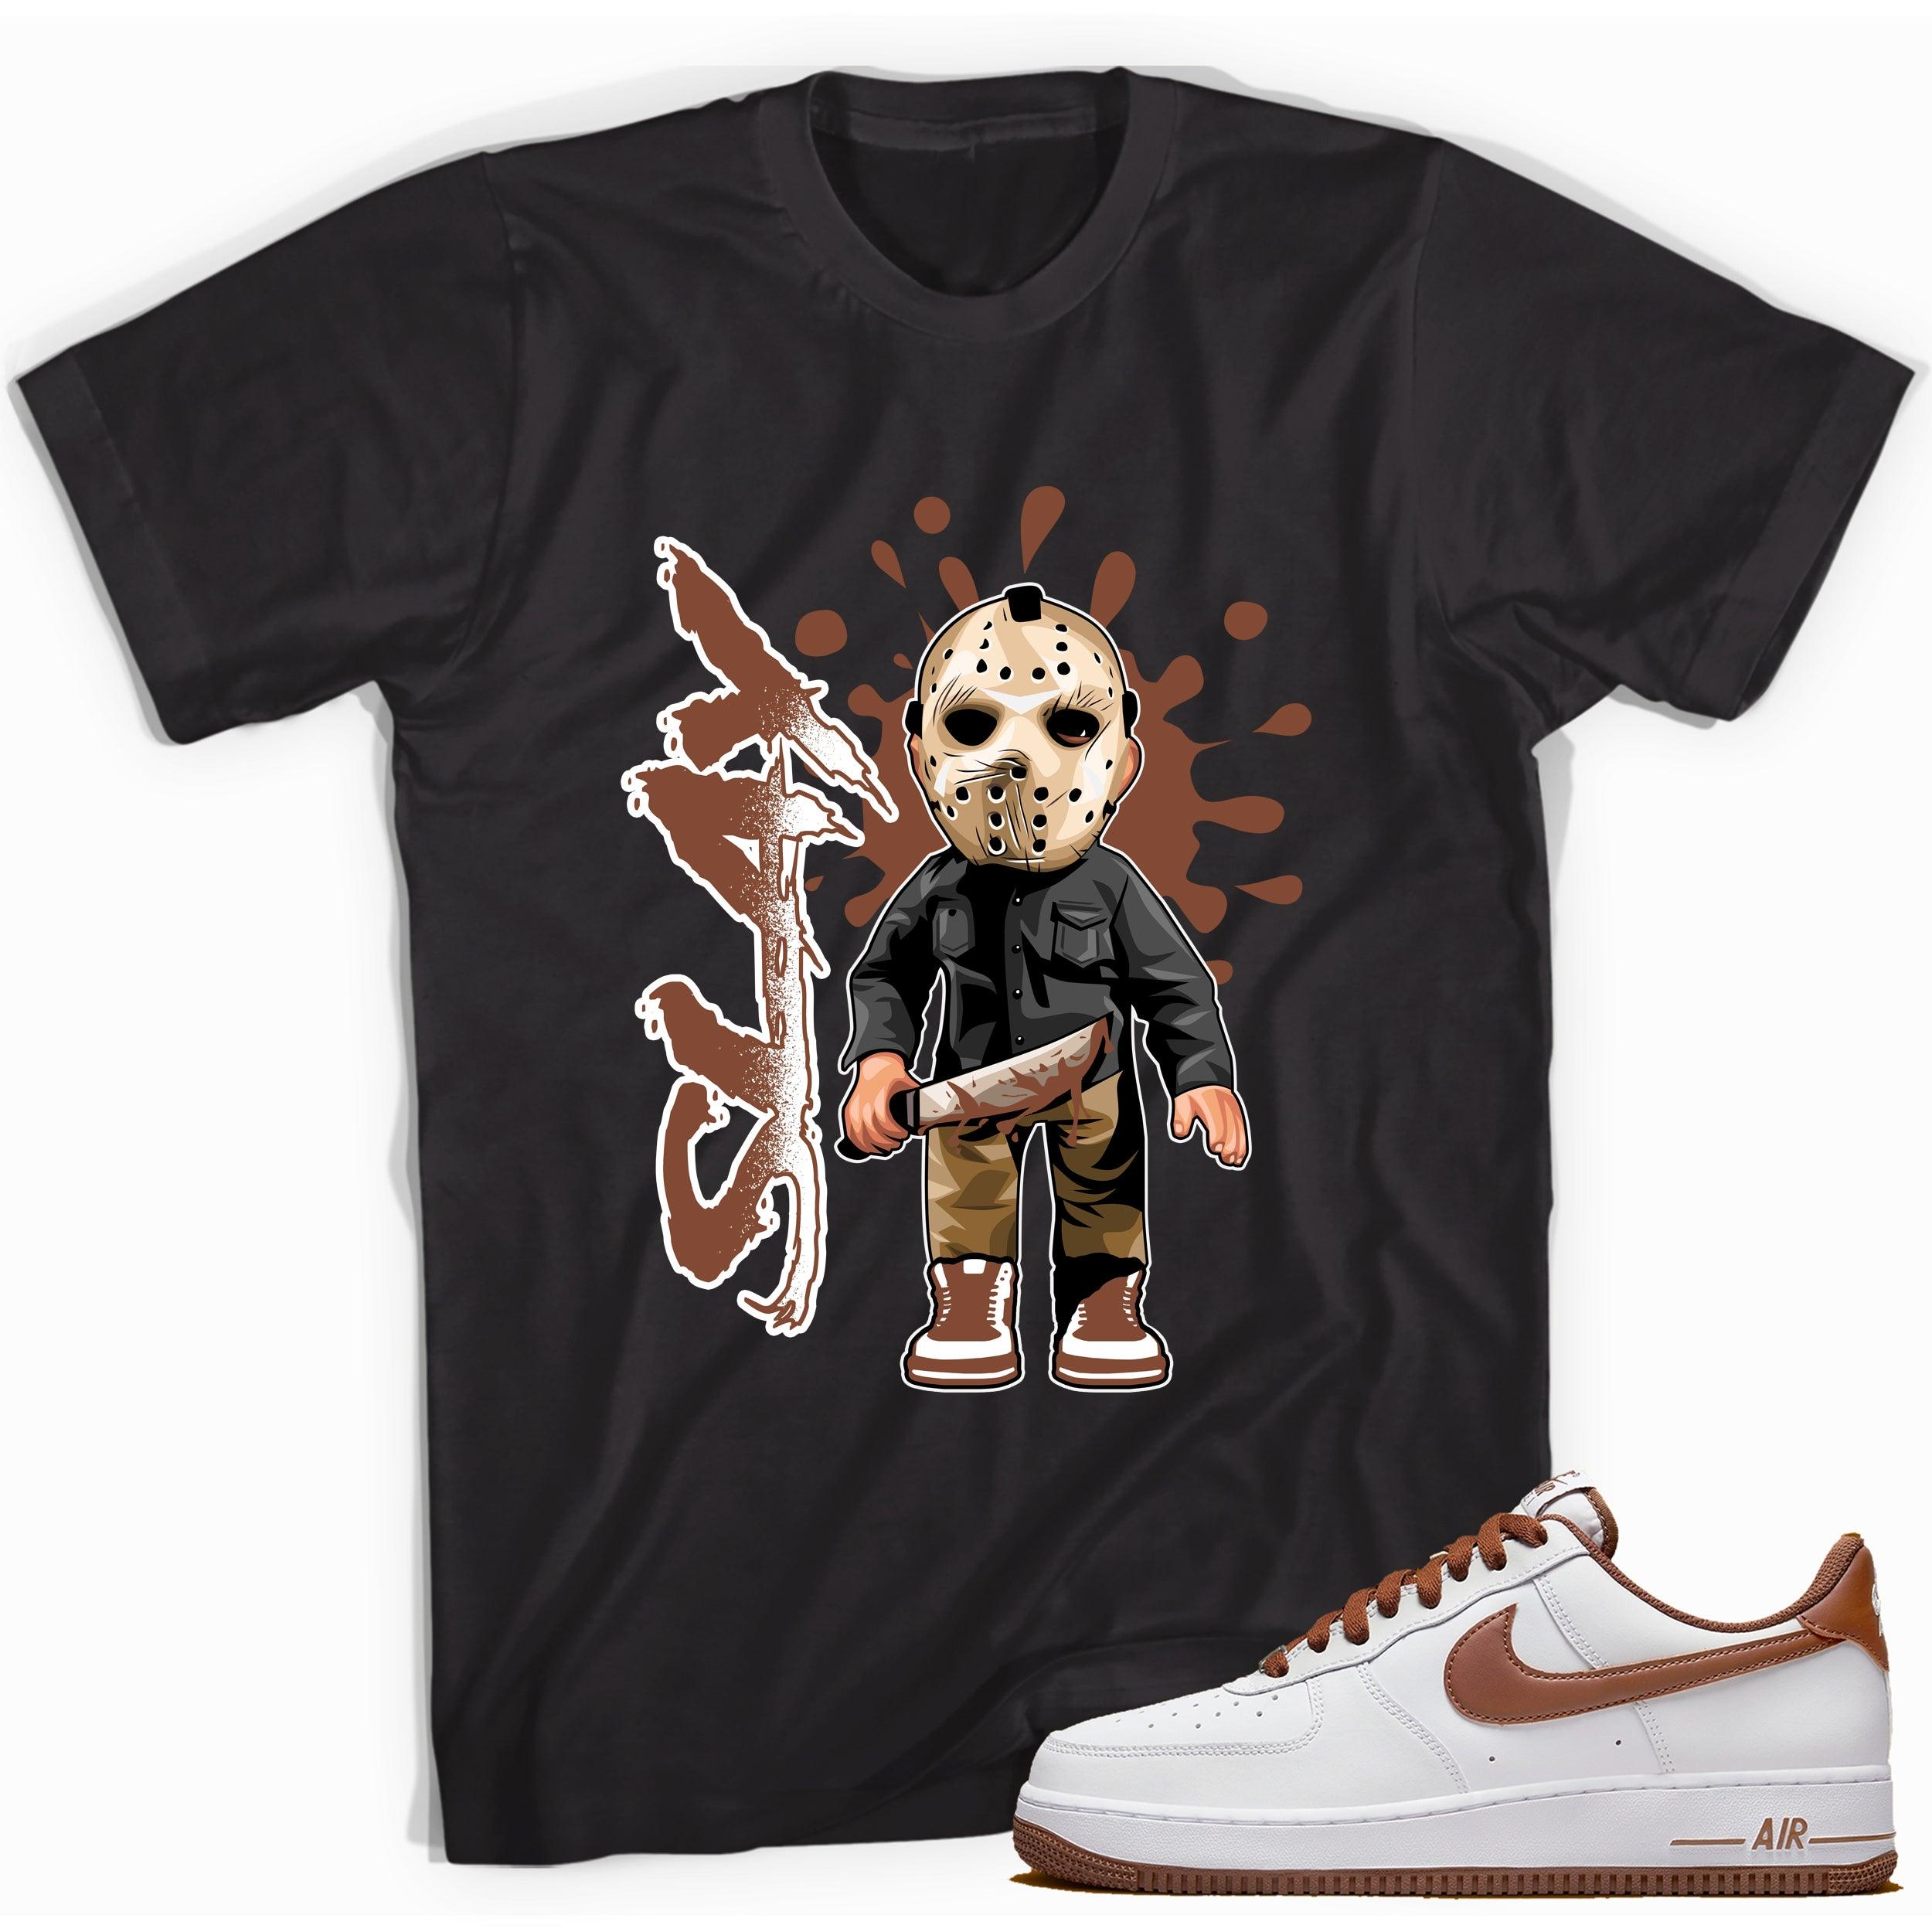 Black Friday the 13th Shirt for Nike Air Force 1 Low Pecan photo